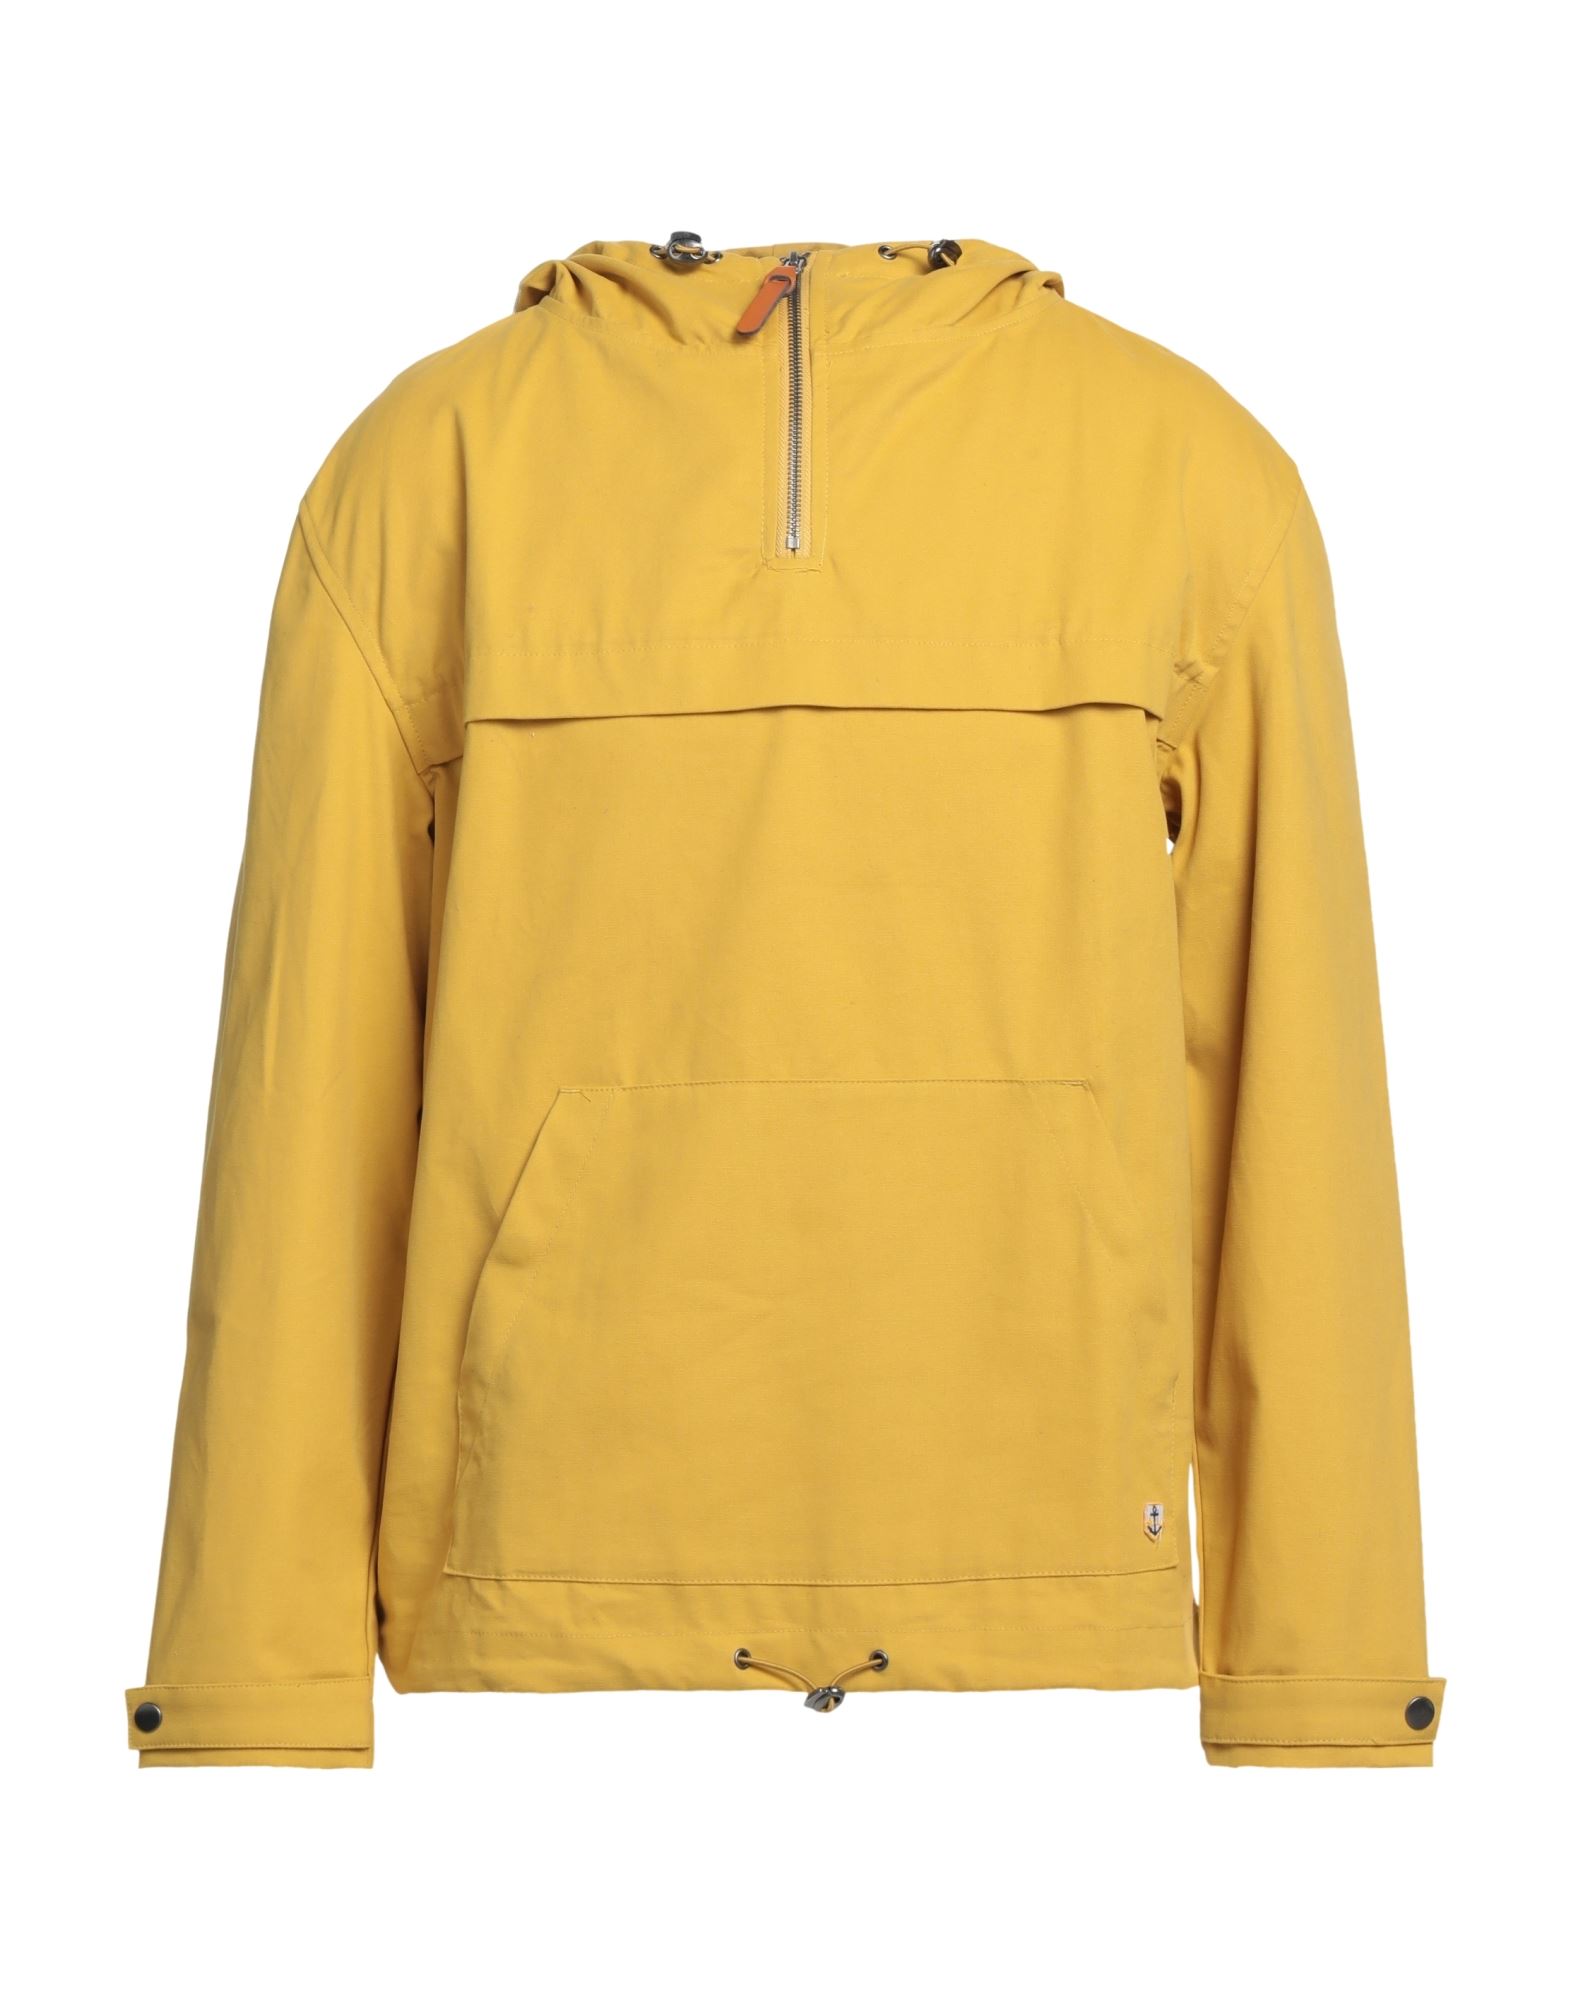 Armor-lux Jackets In Yellow